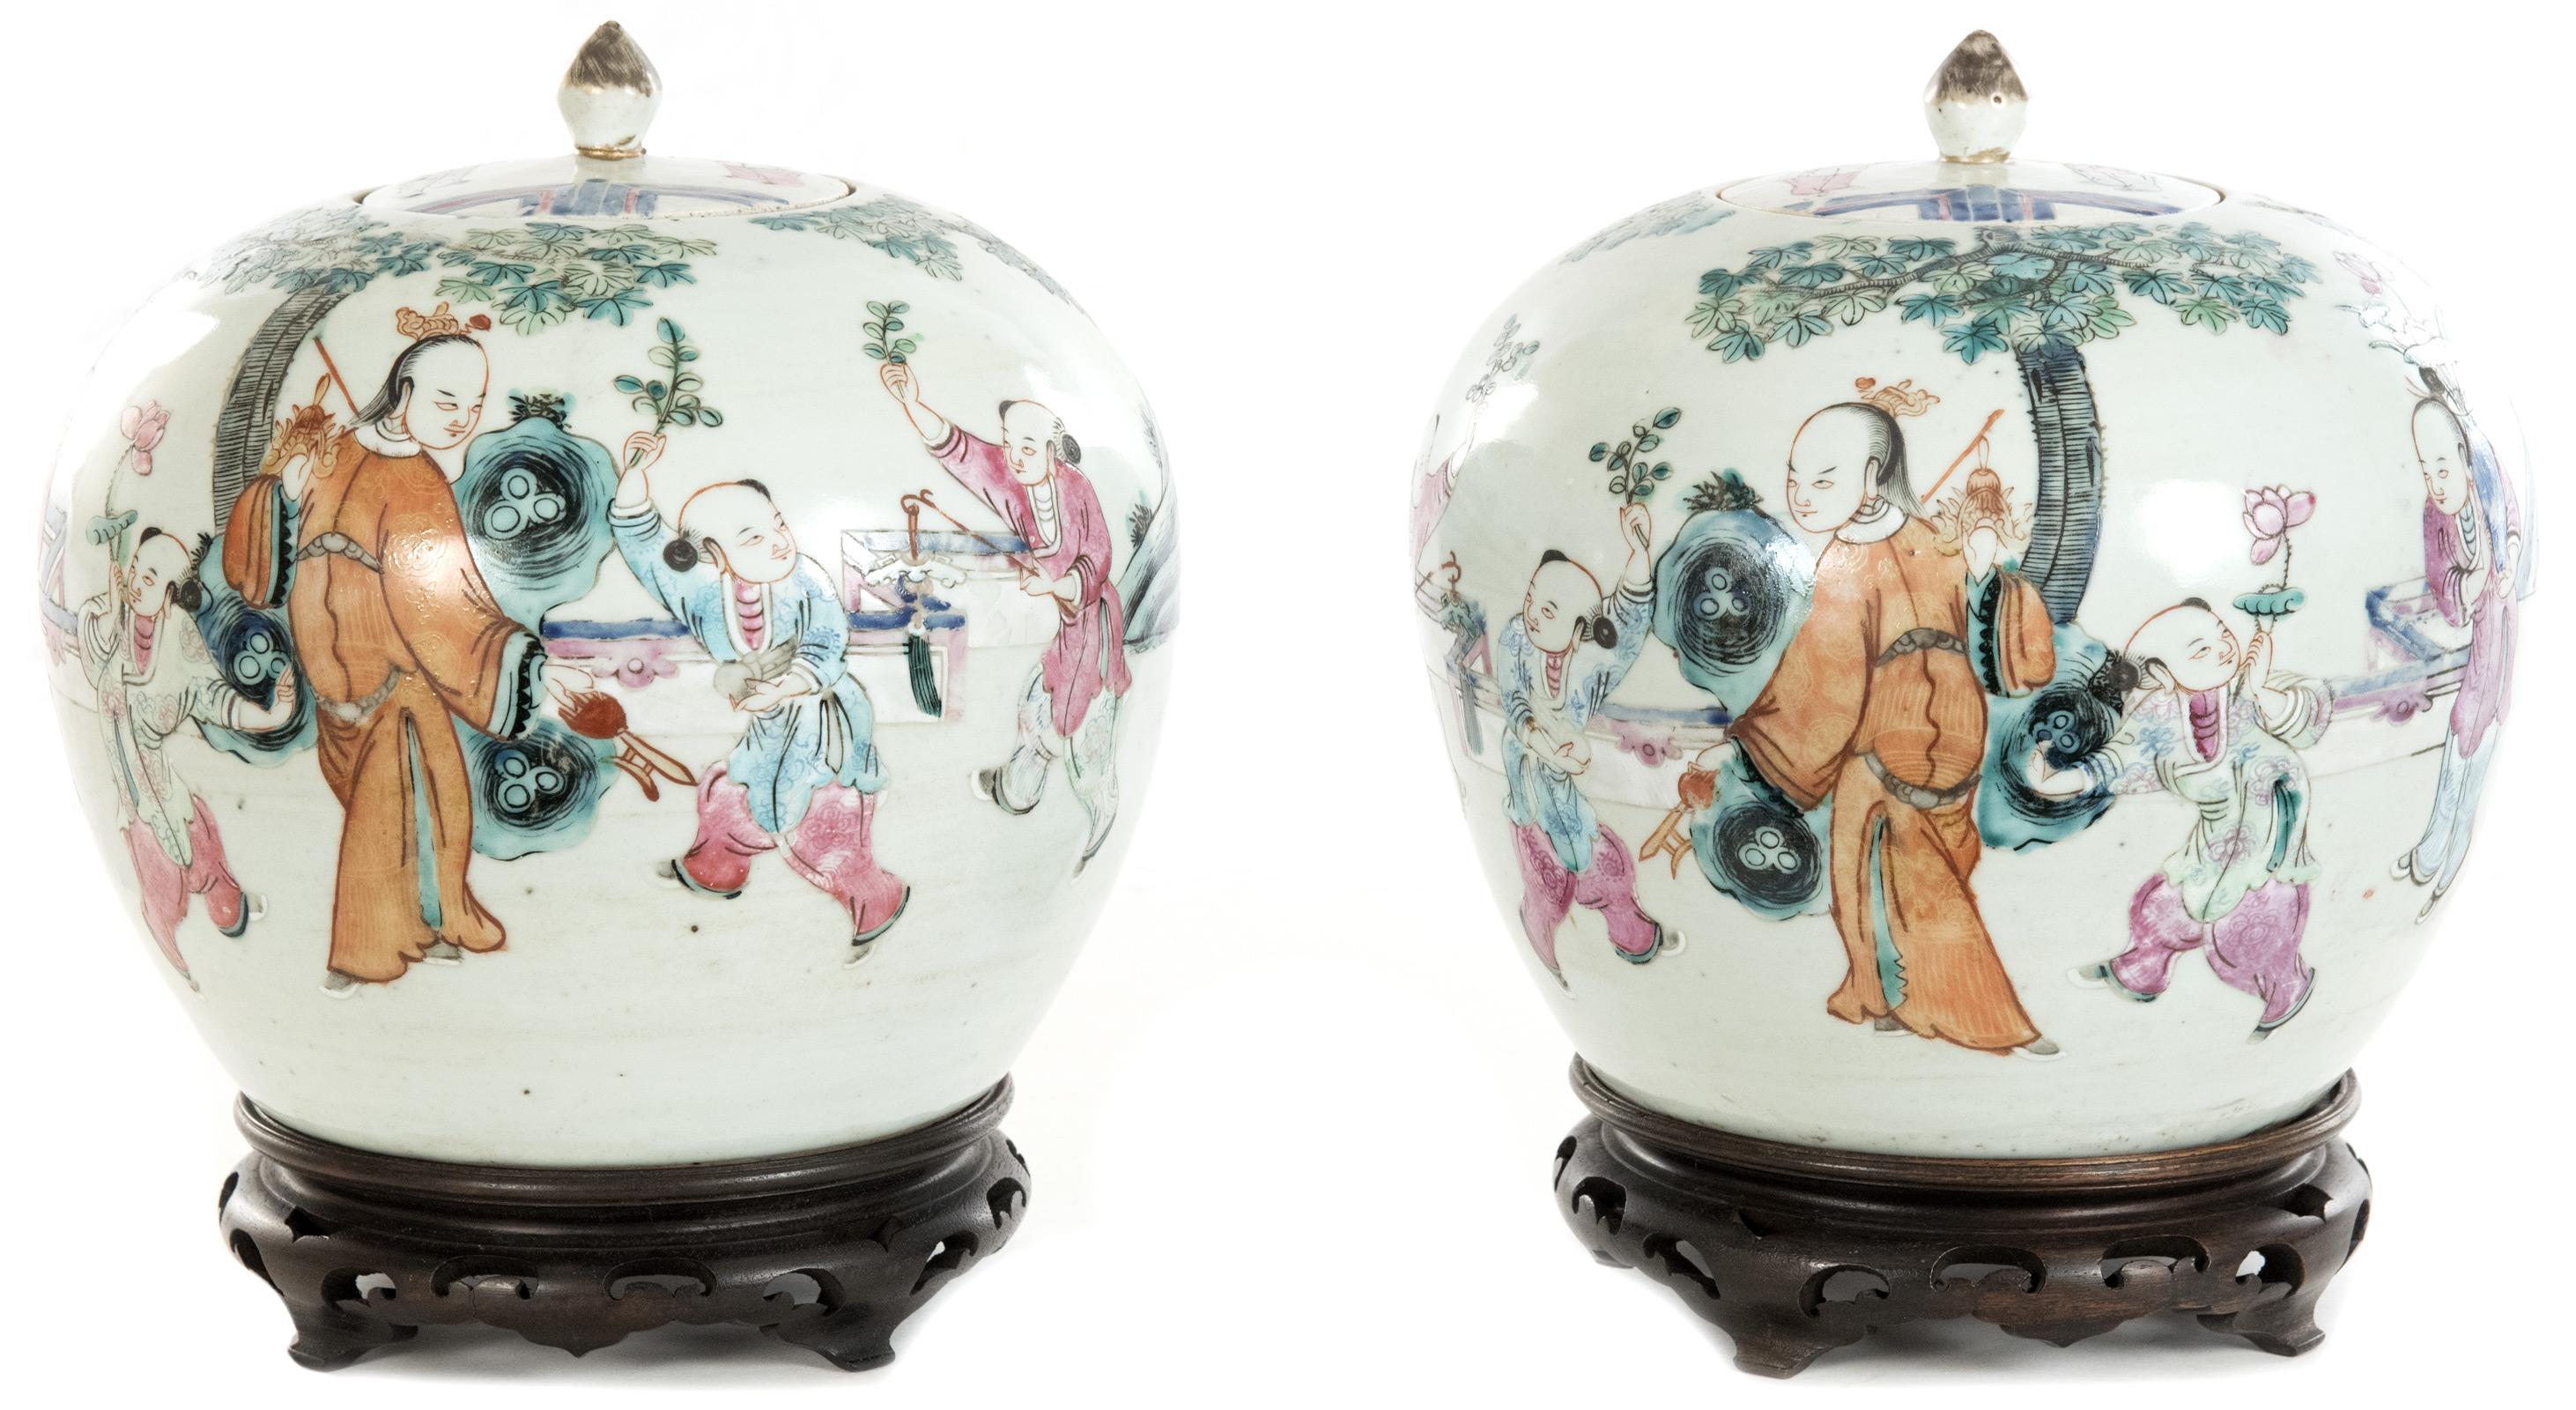 A pair of Chinese famille rose ovoid ginger jars, having a teardrop finial atop a circular lid, the white glazed body covered in round with depictions of children and an elder in a garden landscape, and mounted on a pierced wooden base. The